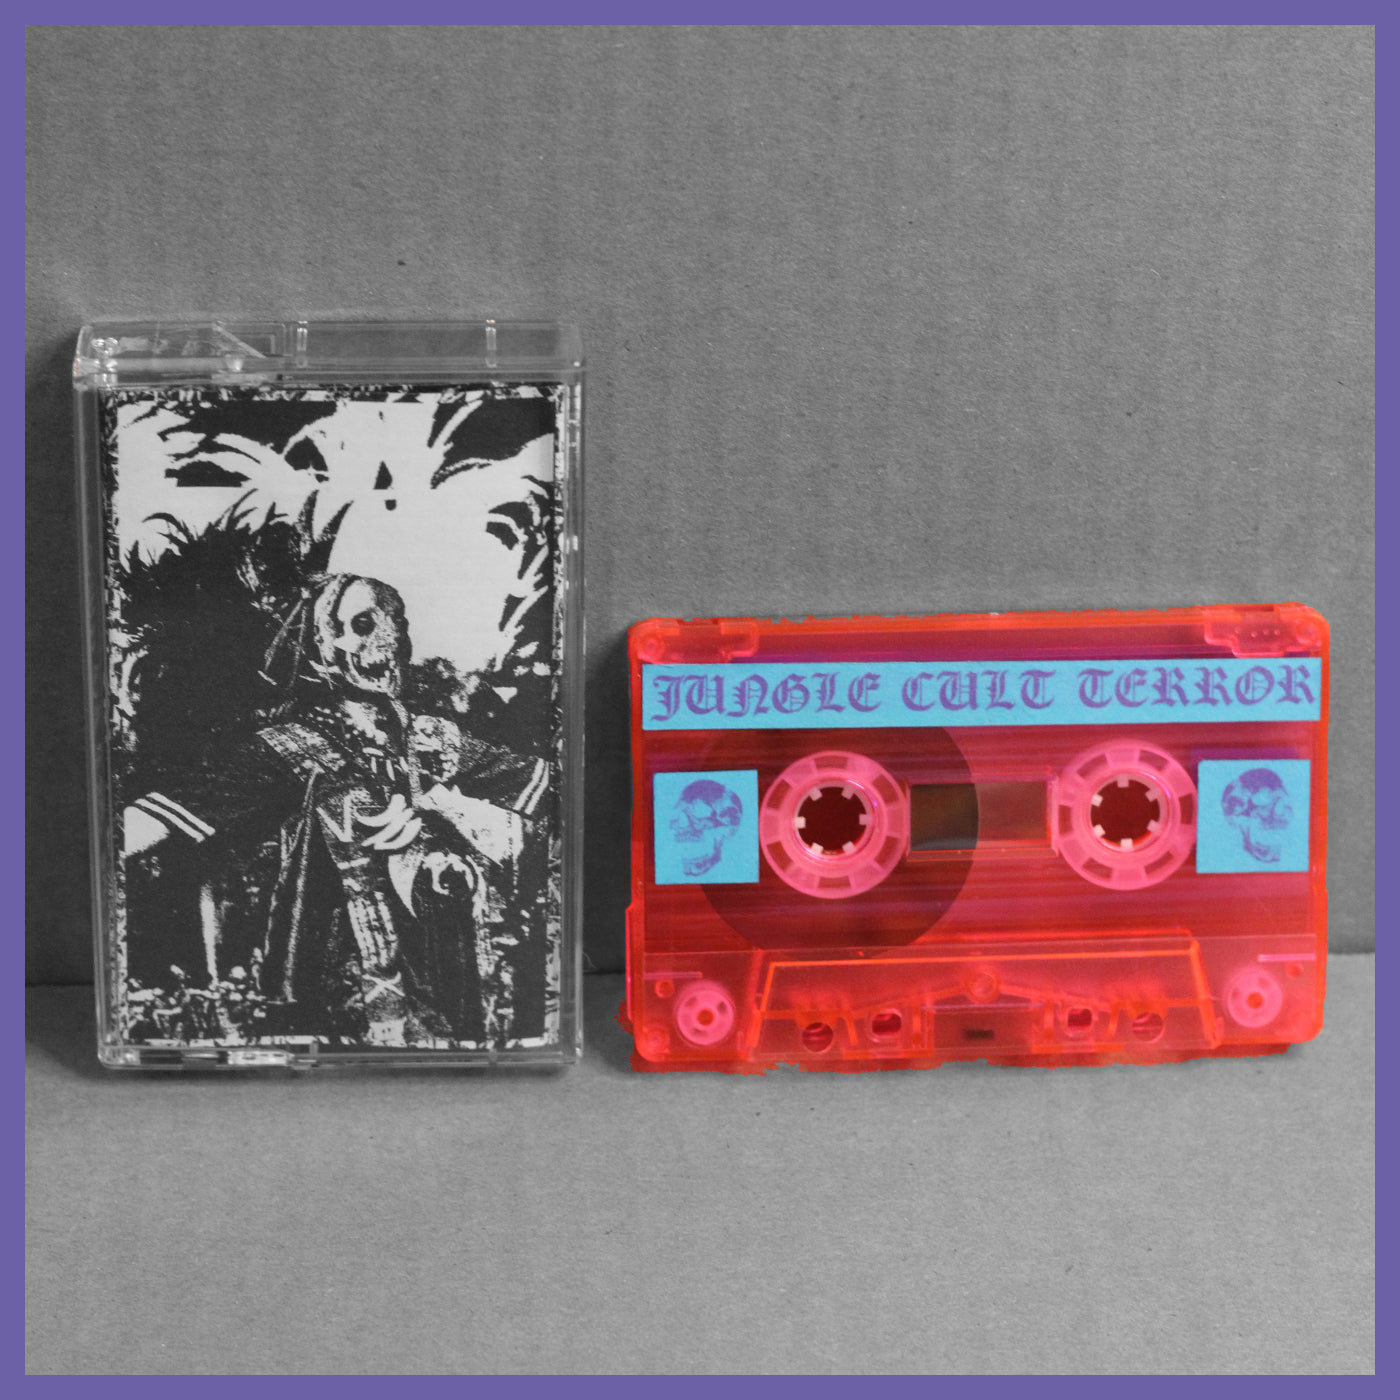 Anatomy of the Heads: Jungle Cult Terror [Cassette | Import]